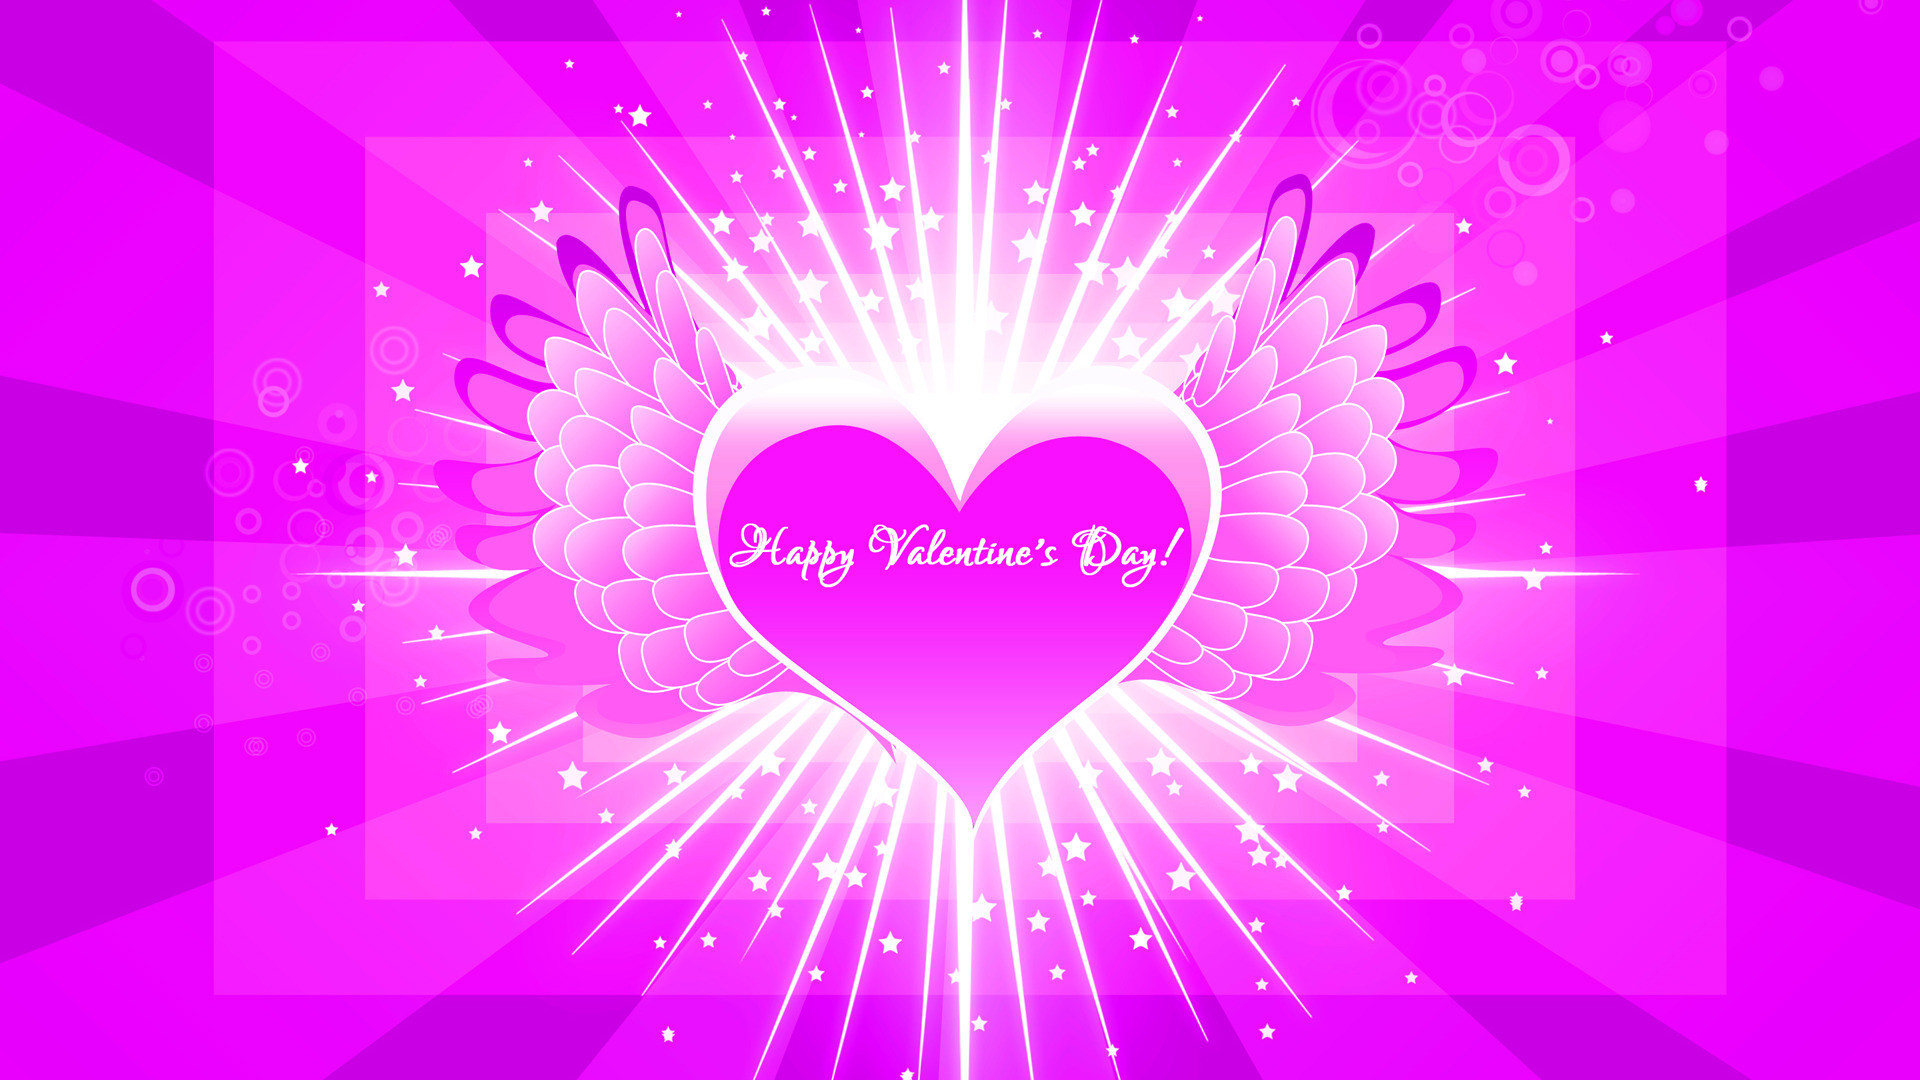 Happy Valentines Day 2015 Hd Wallpaper Images 
 Data - Happy Valentines Day Images Hd - HD Wallpaper 